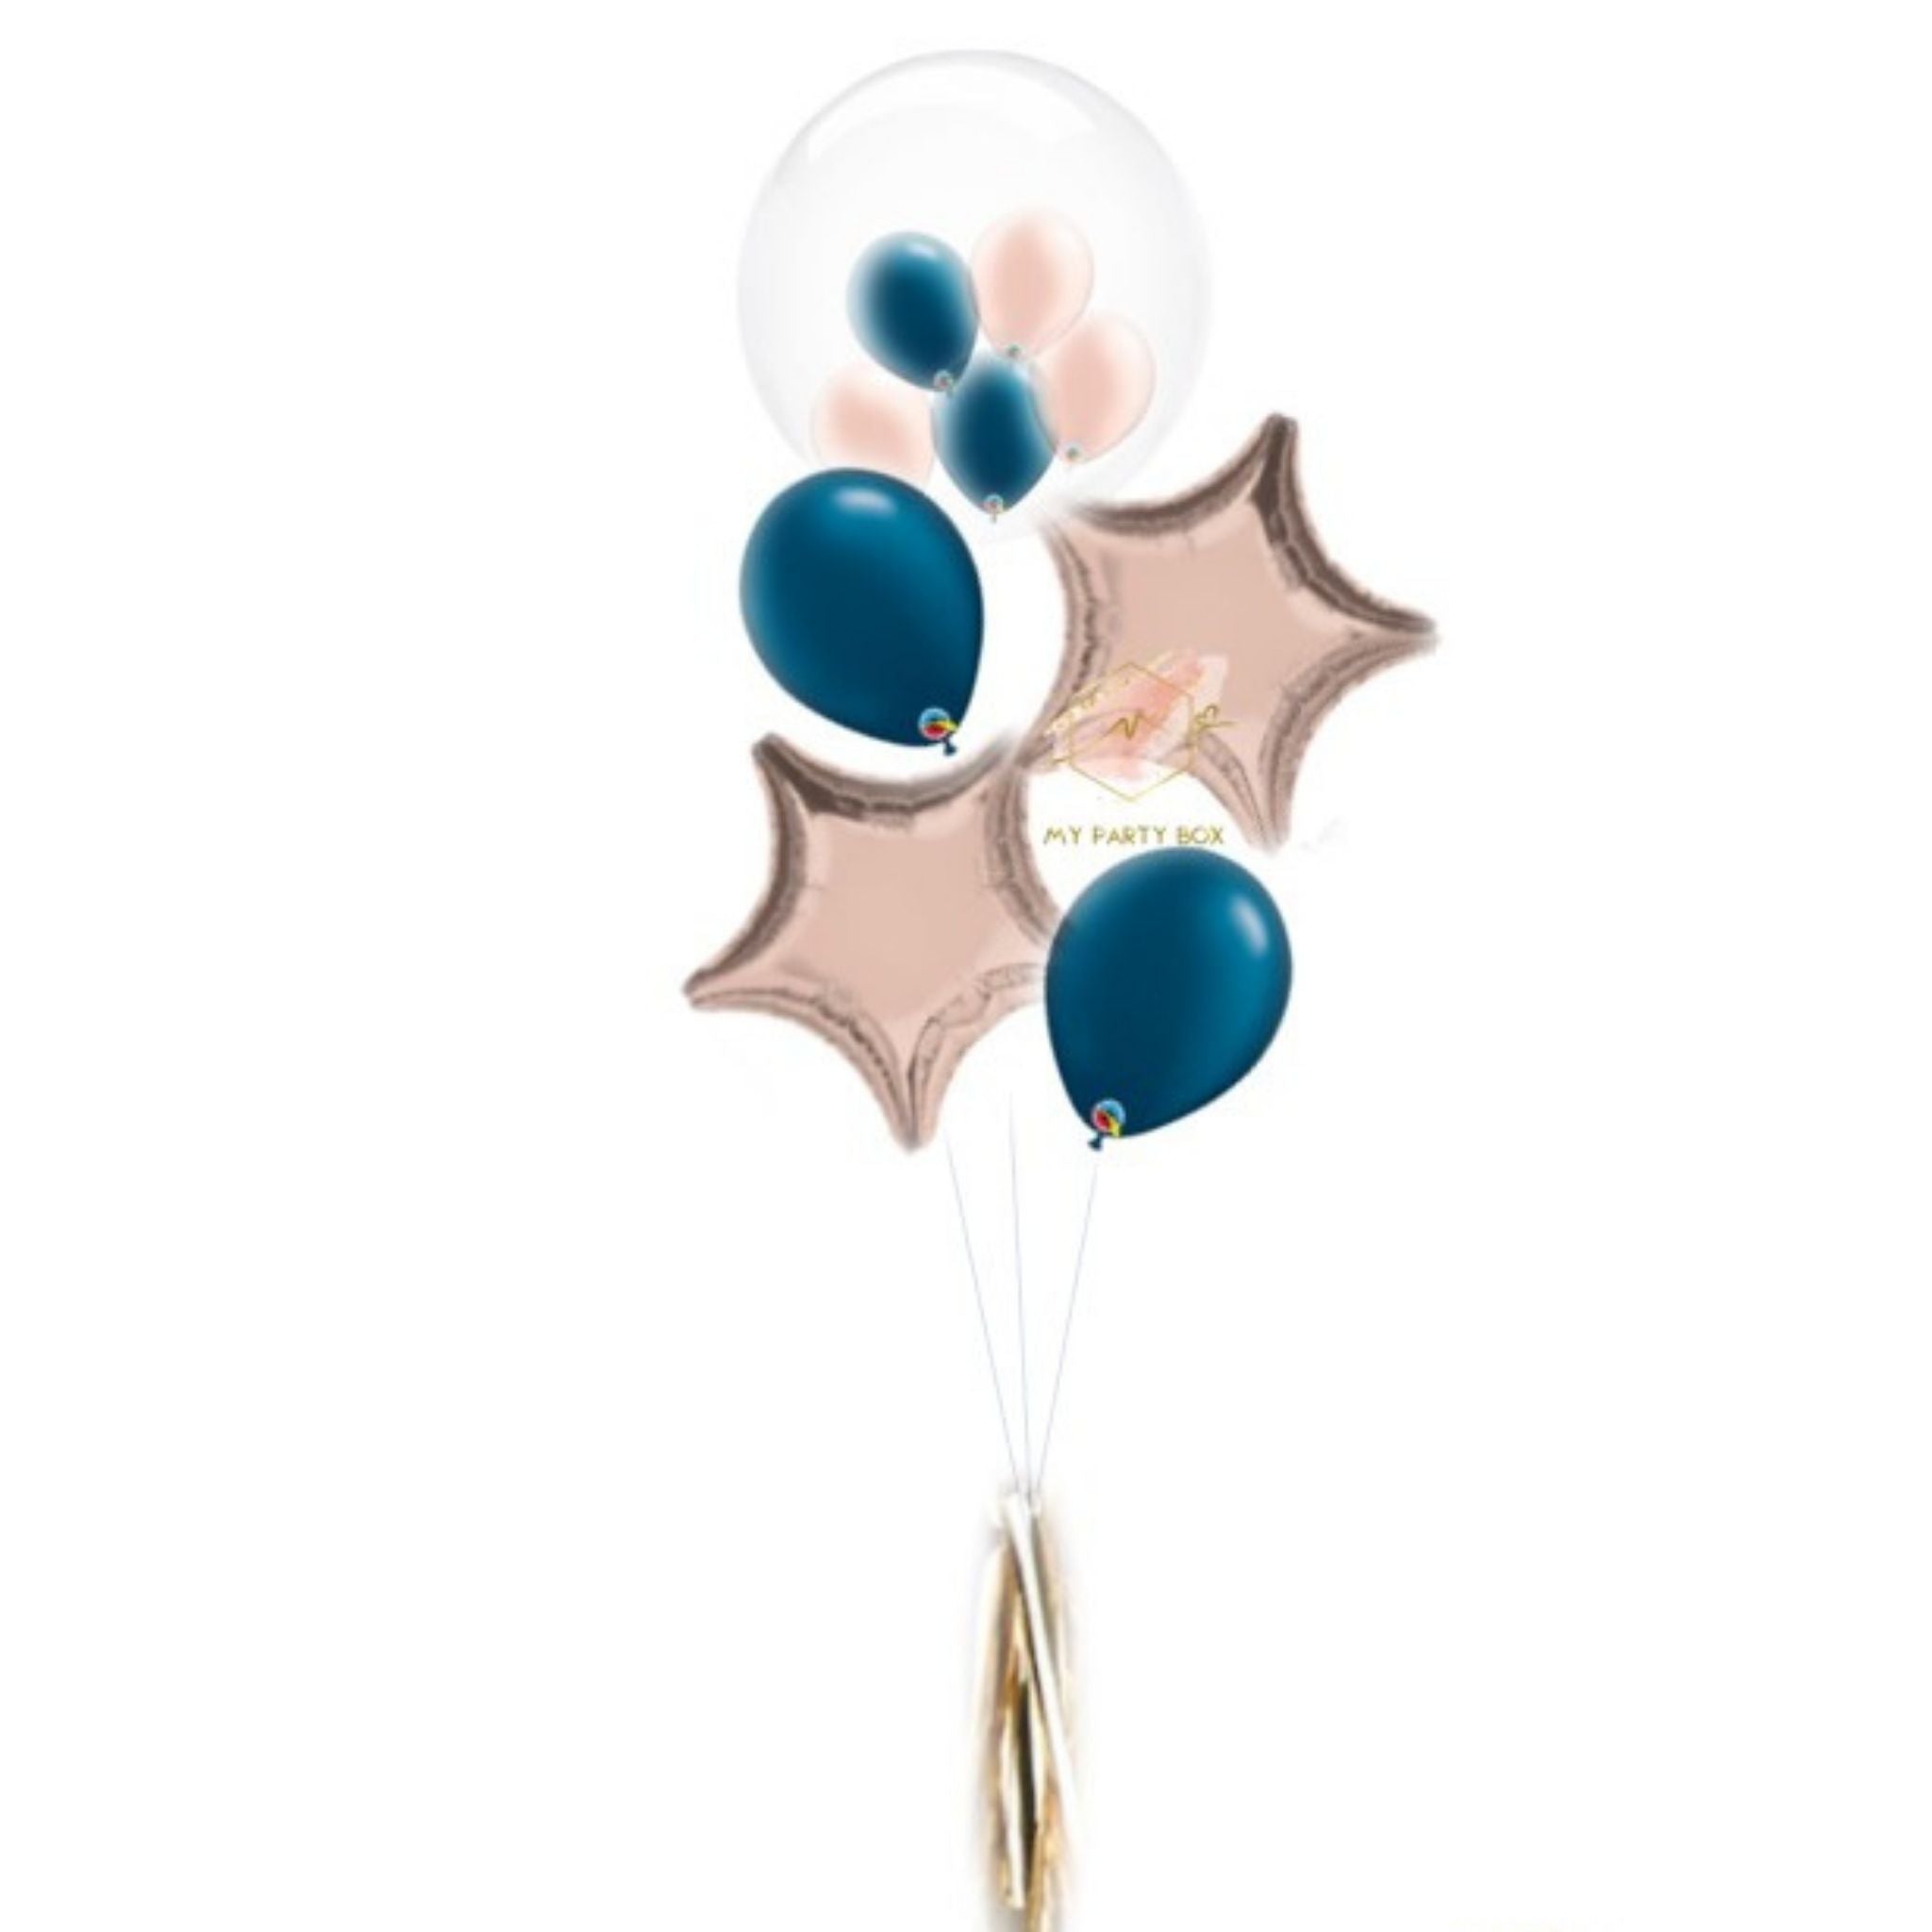 My Party Box Bubble Gum Balloon Bouquet with Midnight Blue Latex Balloons & Rose Gold Foil Star Balloons and Bubble balloons with mini balloons inside